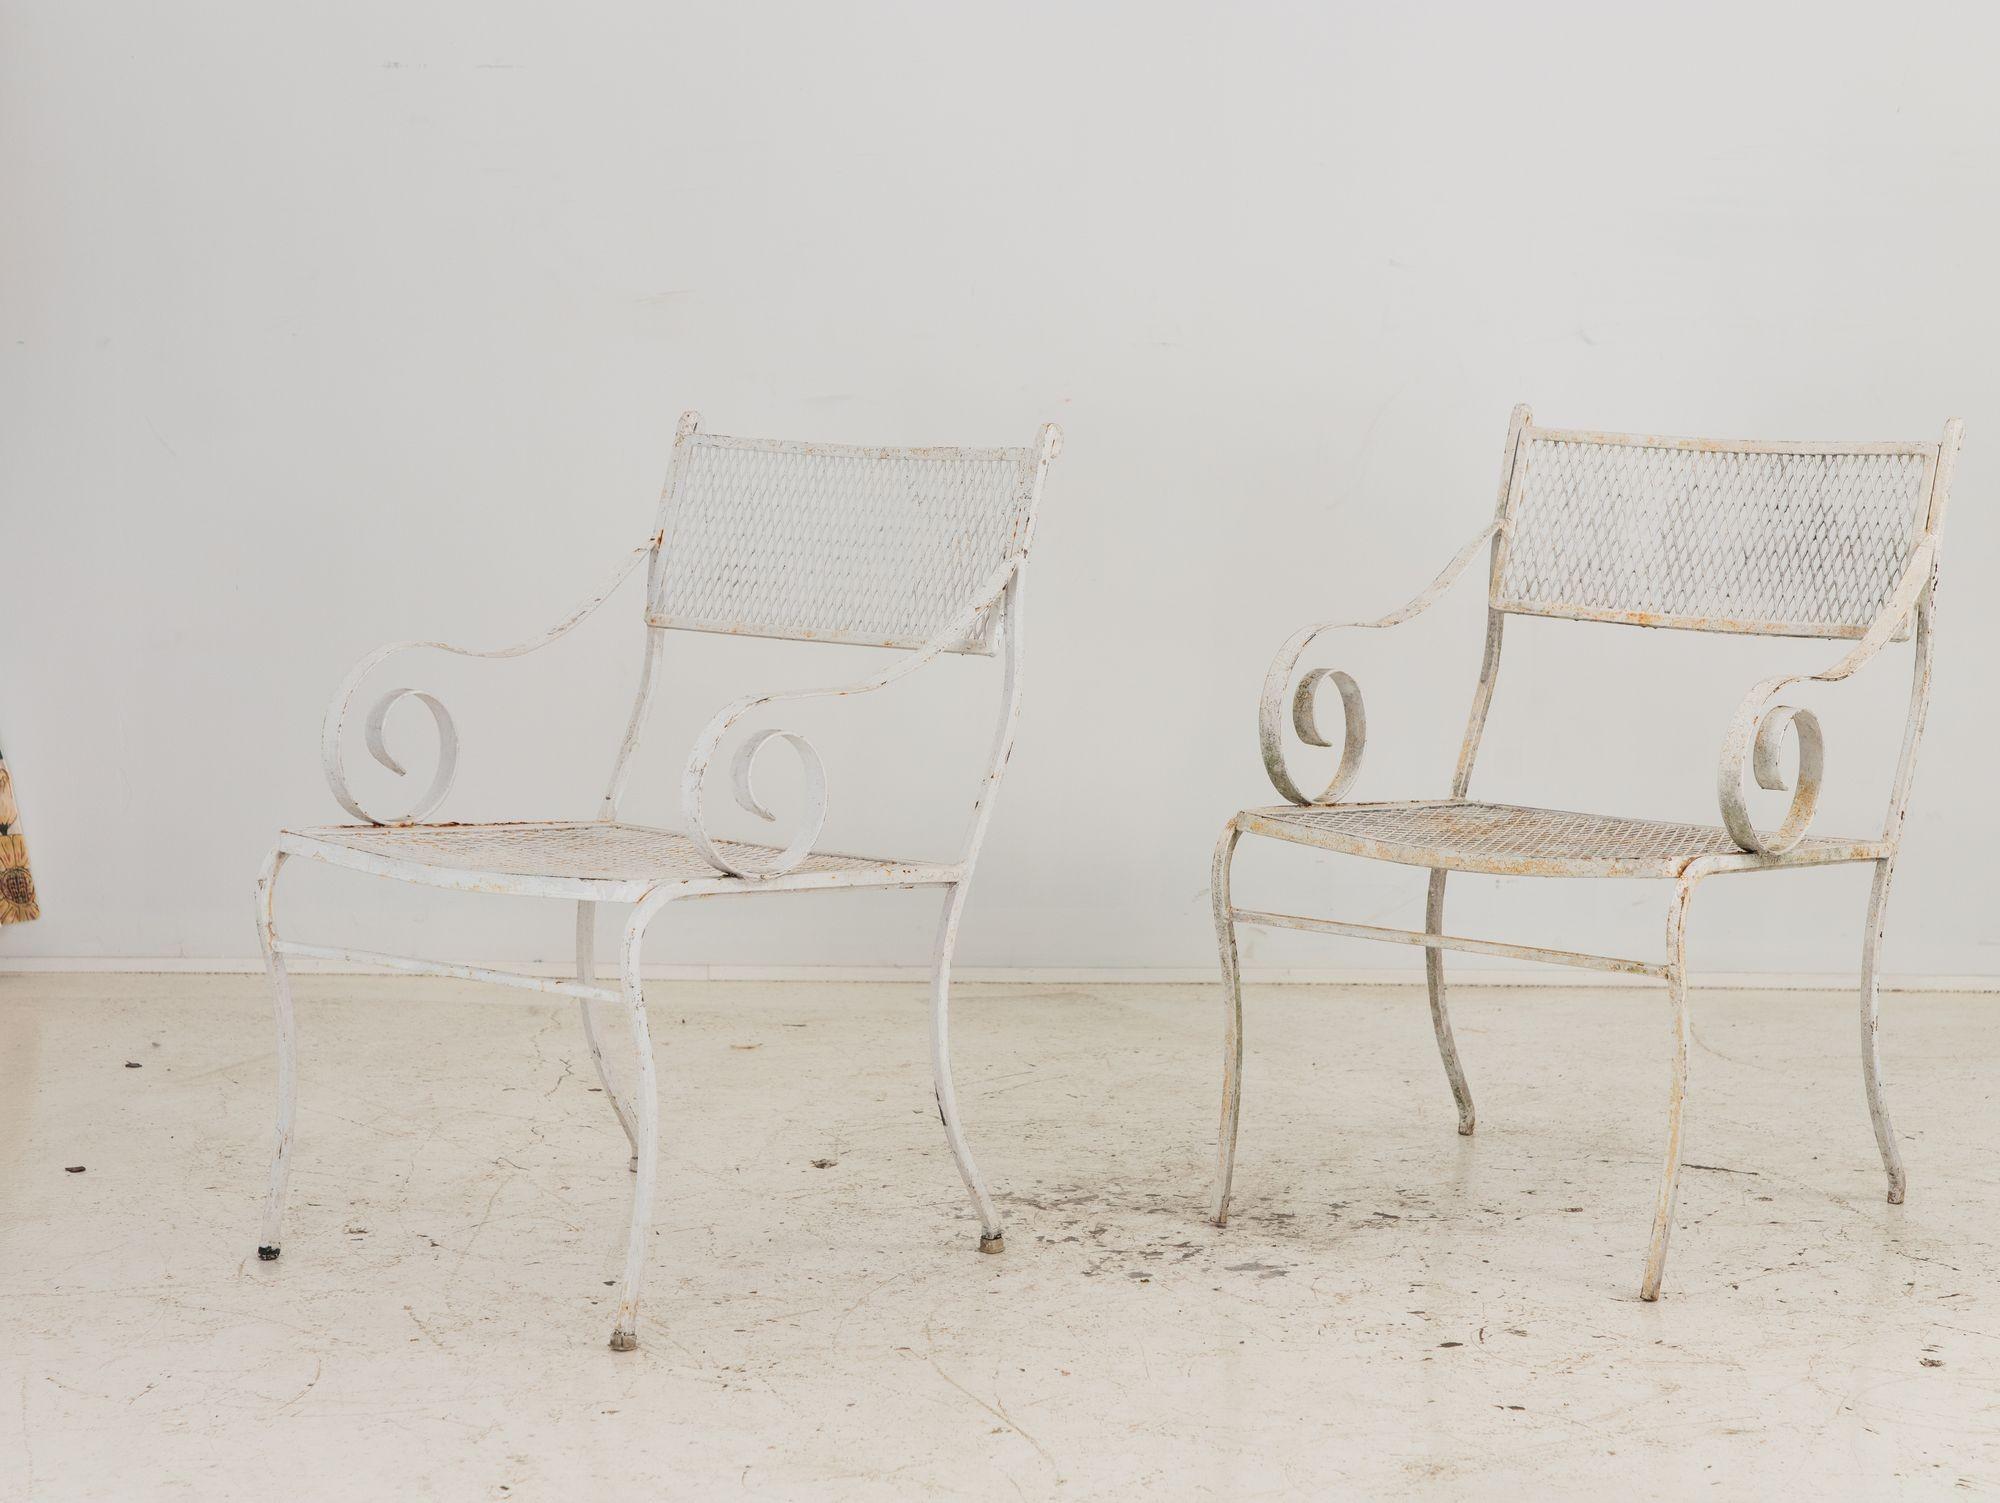 Crafted in the vibrant era of 1950s America, this pair of white-painted iron chairs embodies classic elegance and enduring style. With gracefully scrolled arms and splay legs, they exude sophistication reminiscent of the iconic designs of Woodard